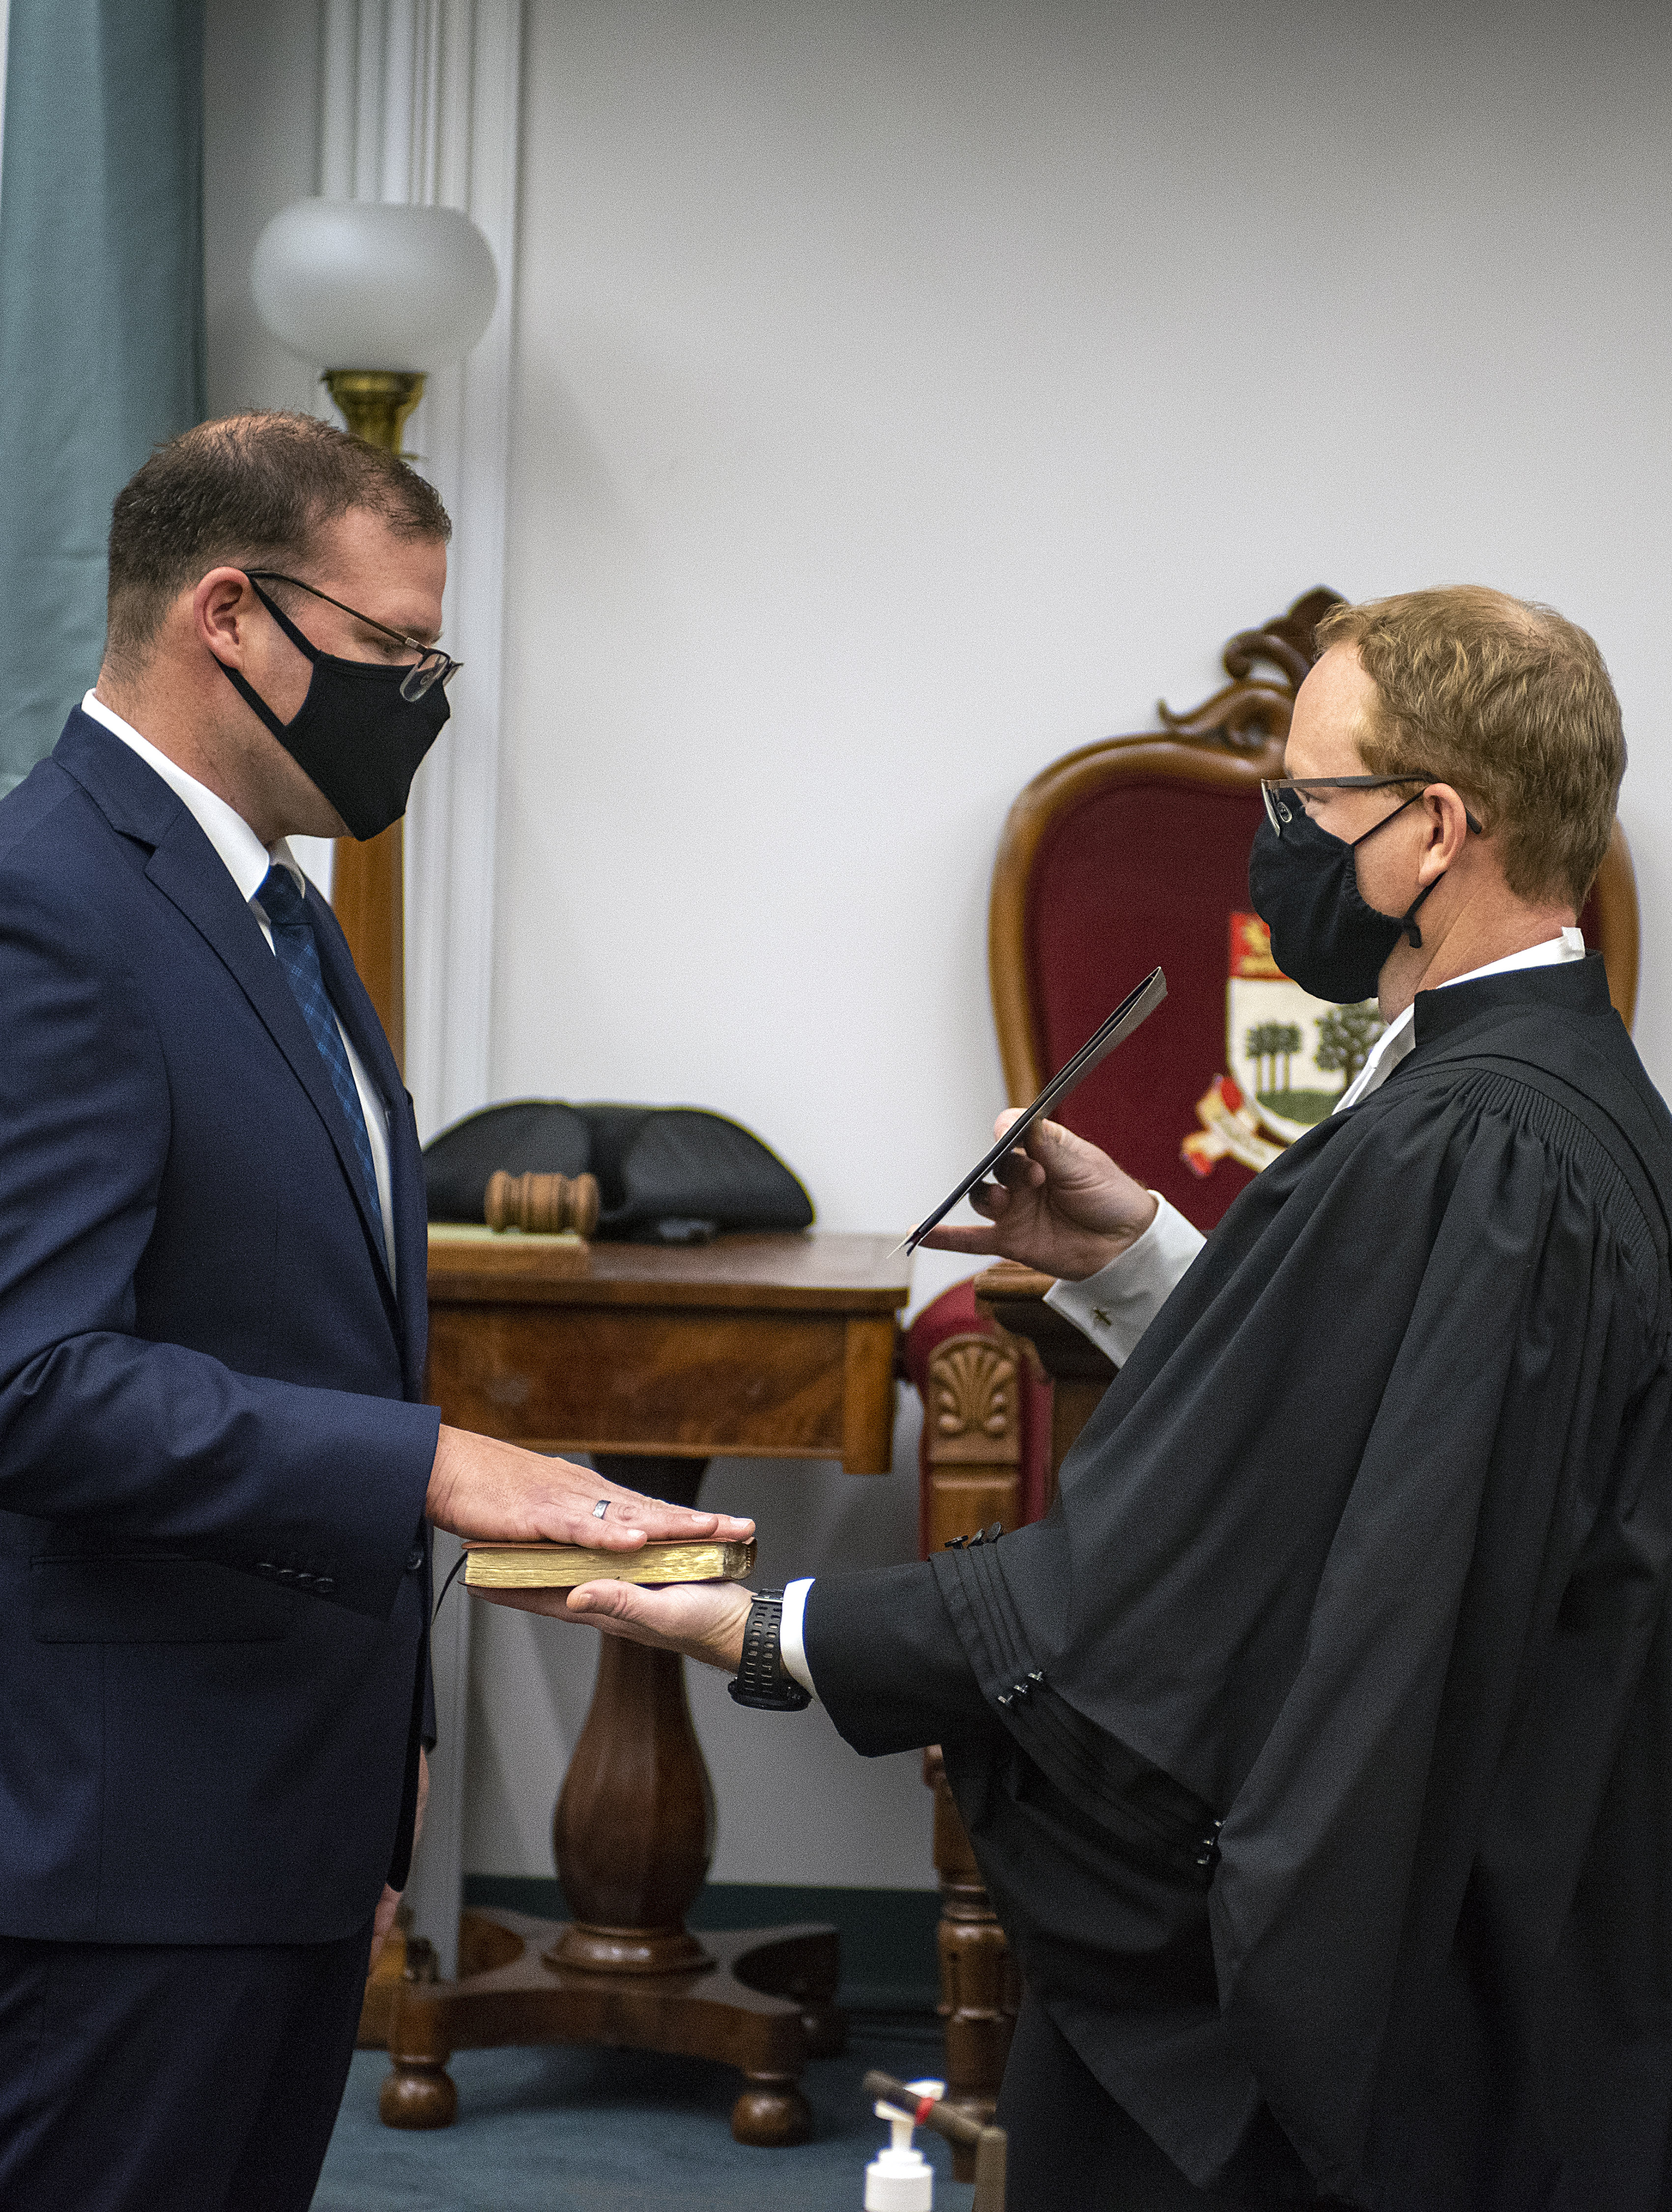 A photo of Zach Bell swearing the oath of allegiance. The oath is being administered by Joseph Jeffrey, Clerk of the Legislative Assembly.